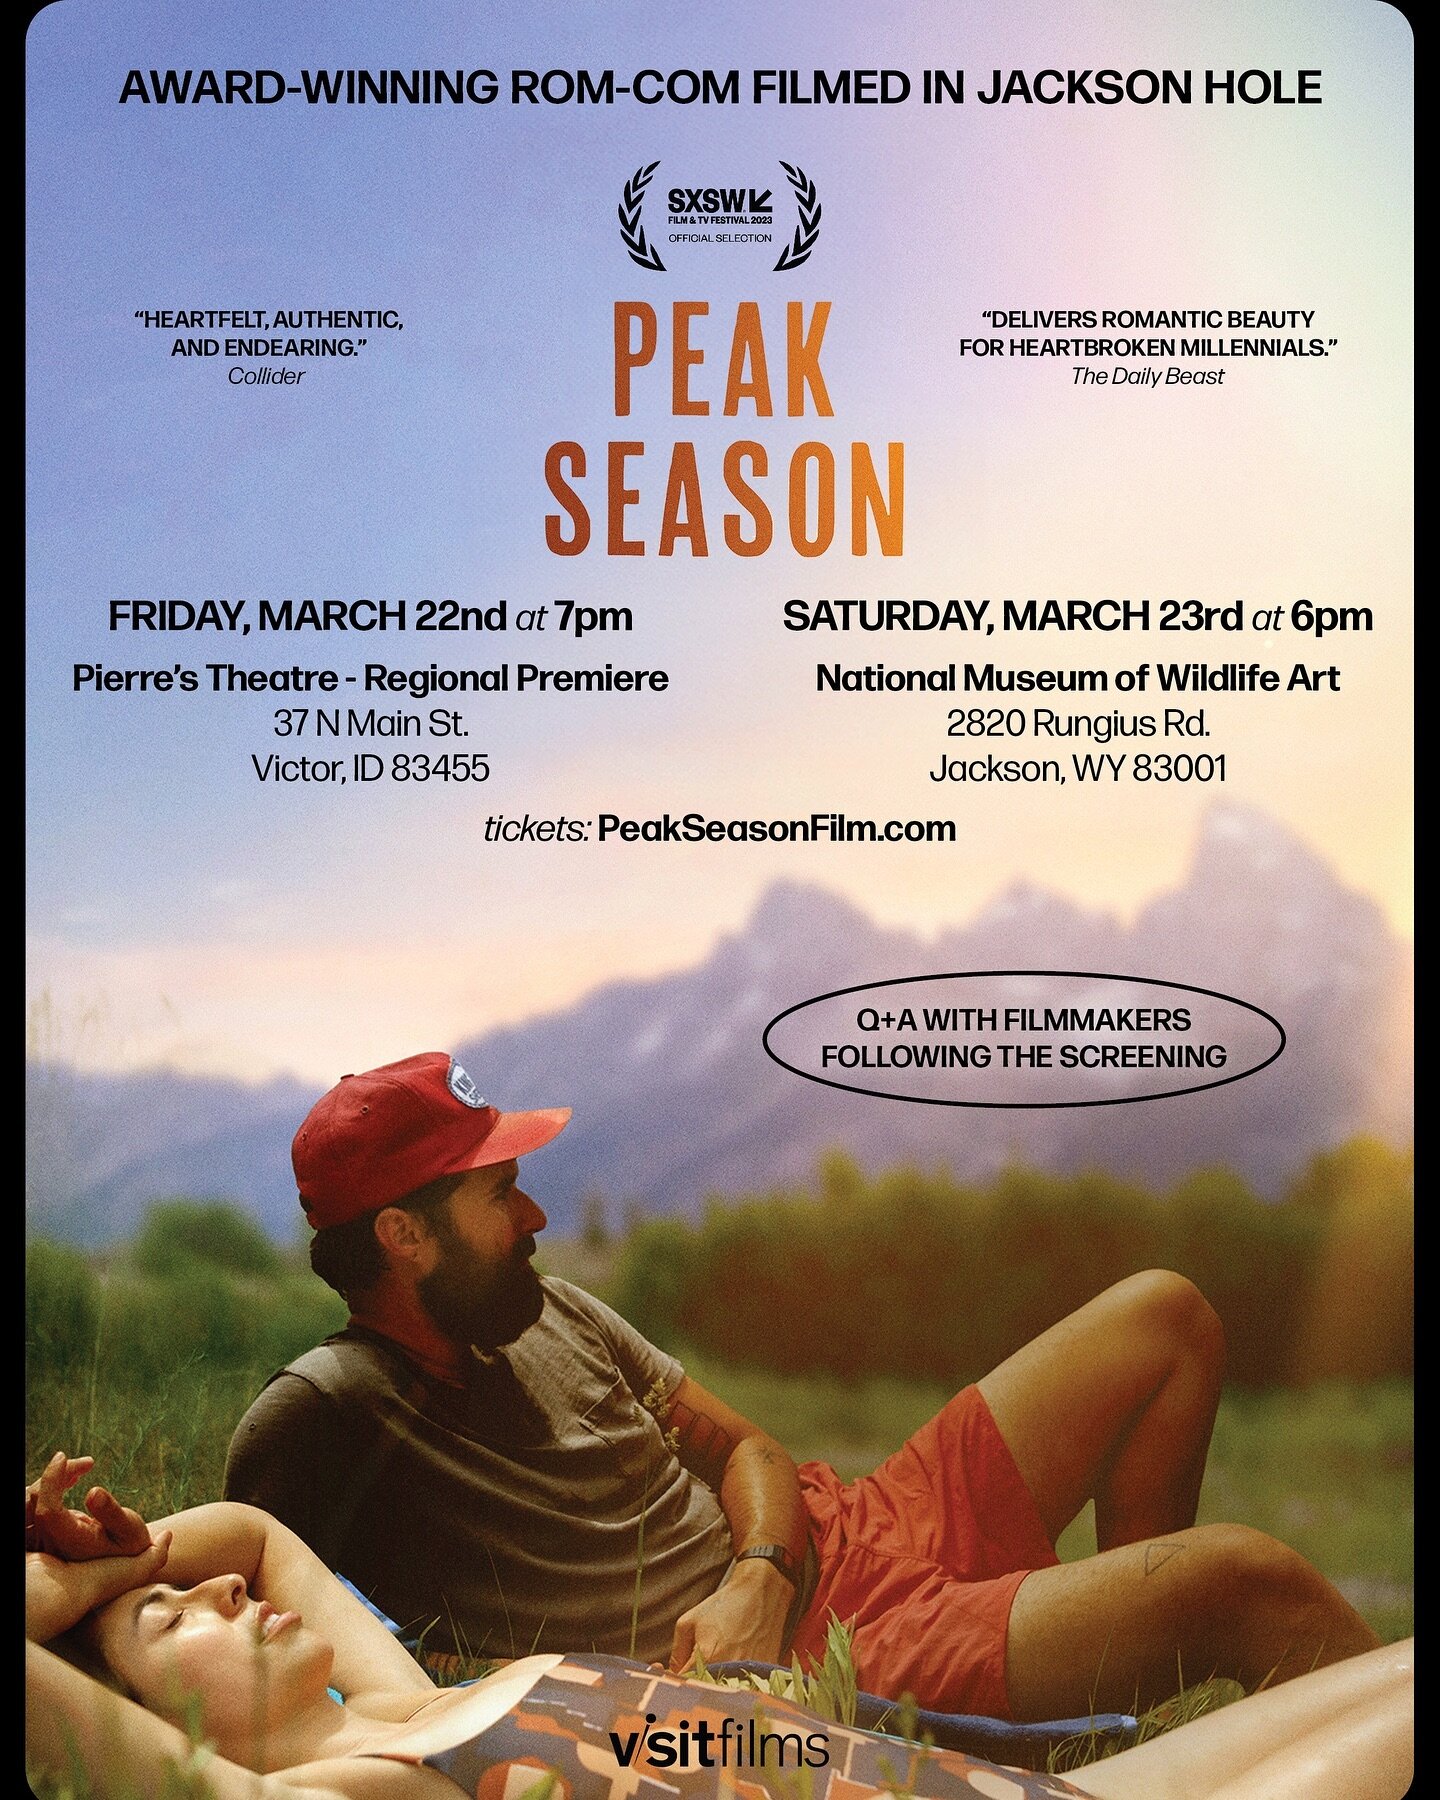 Peak Season returns to Idaho and Wyoming this week for two special screenings. 

Friday, March 22nd at 7PM - Regional Premiere 
Pierre&rsquo;s Theatre @pierrestheatre 
37 North Main Street
Victor, Idaho 83455

Saturday, March 23rd at 6PM
National Mus